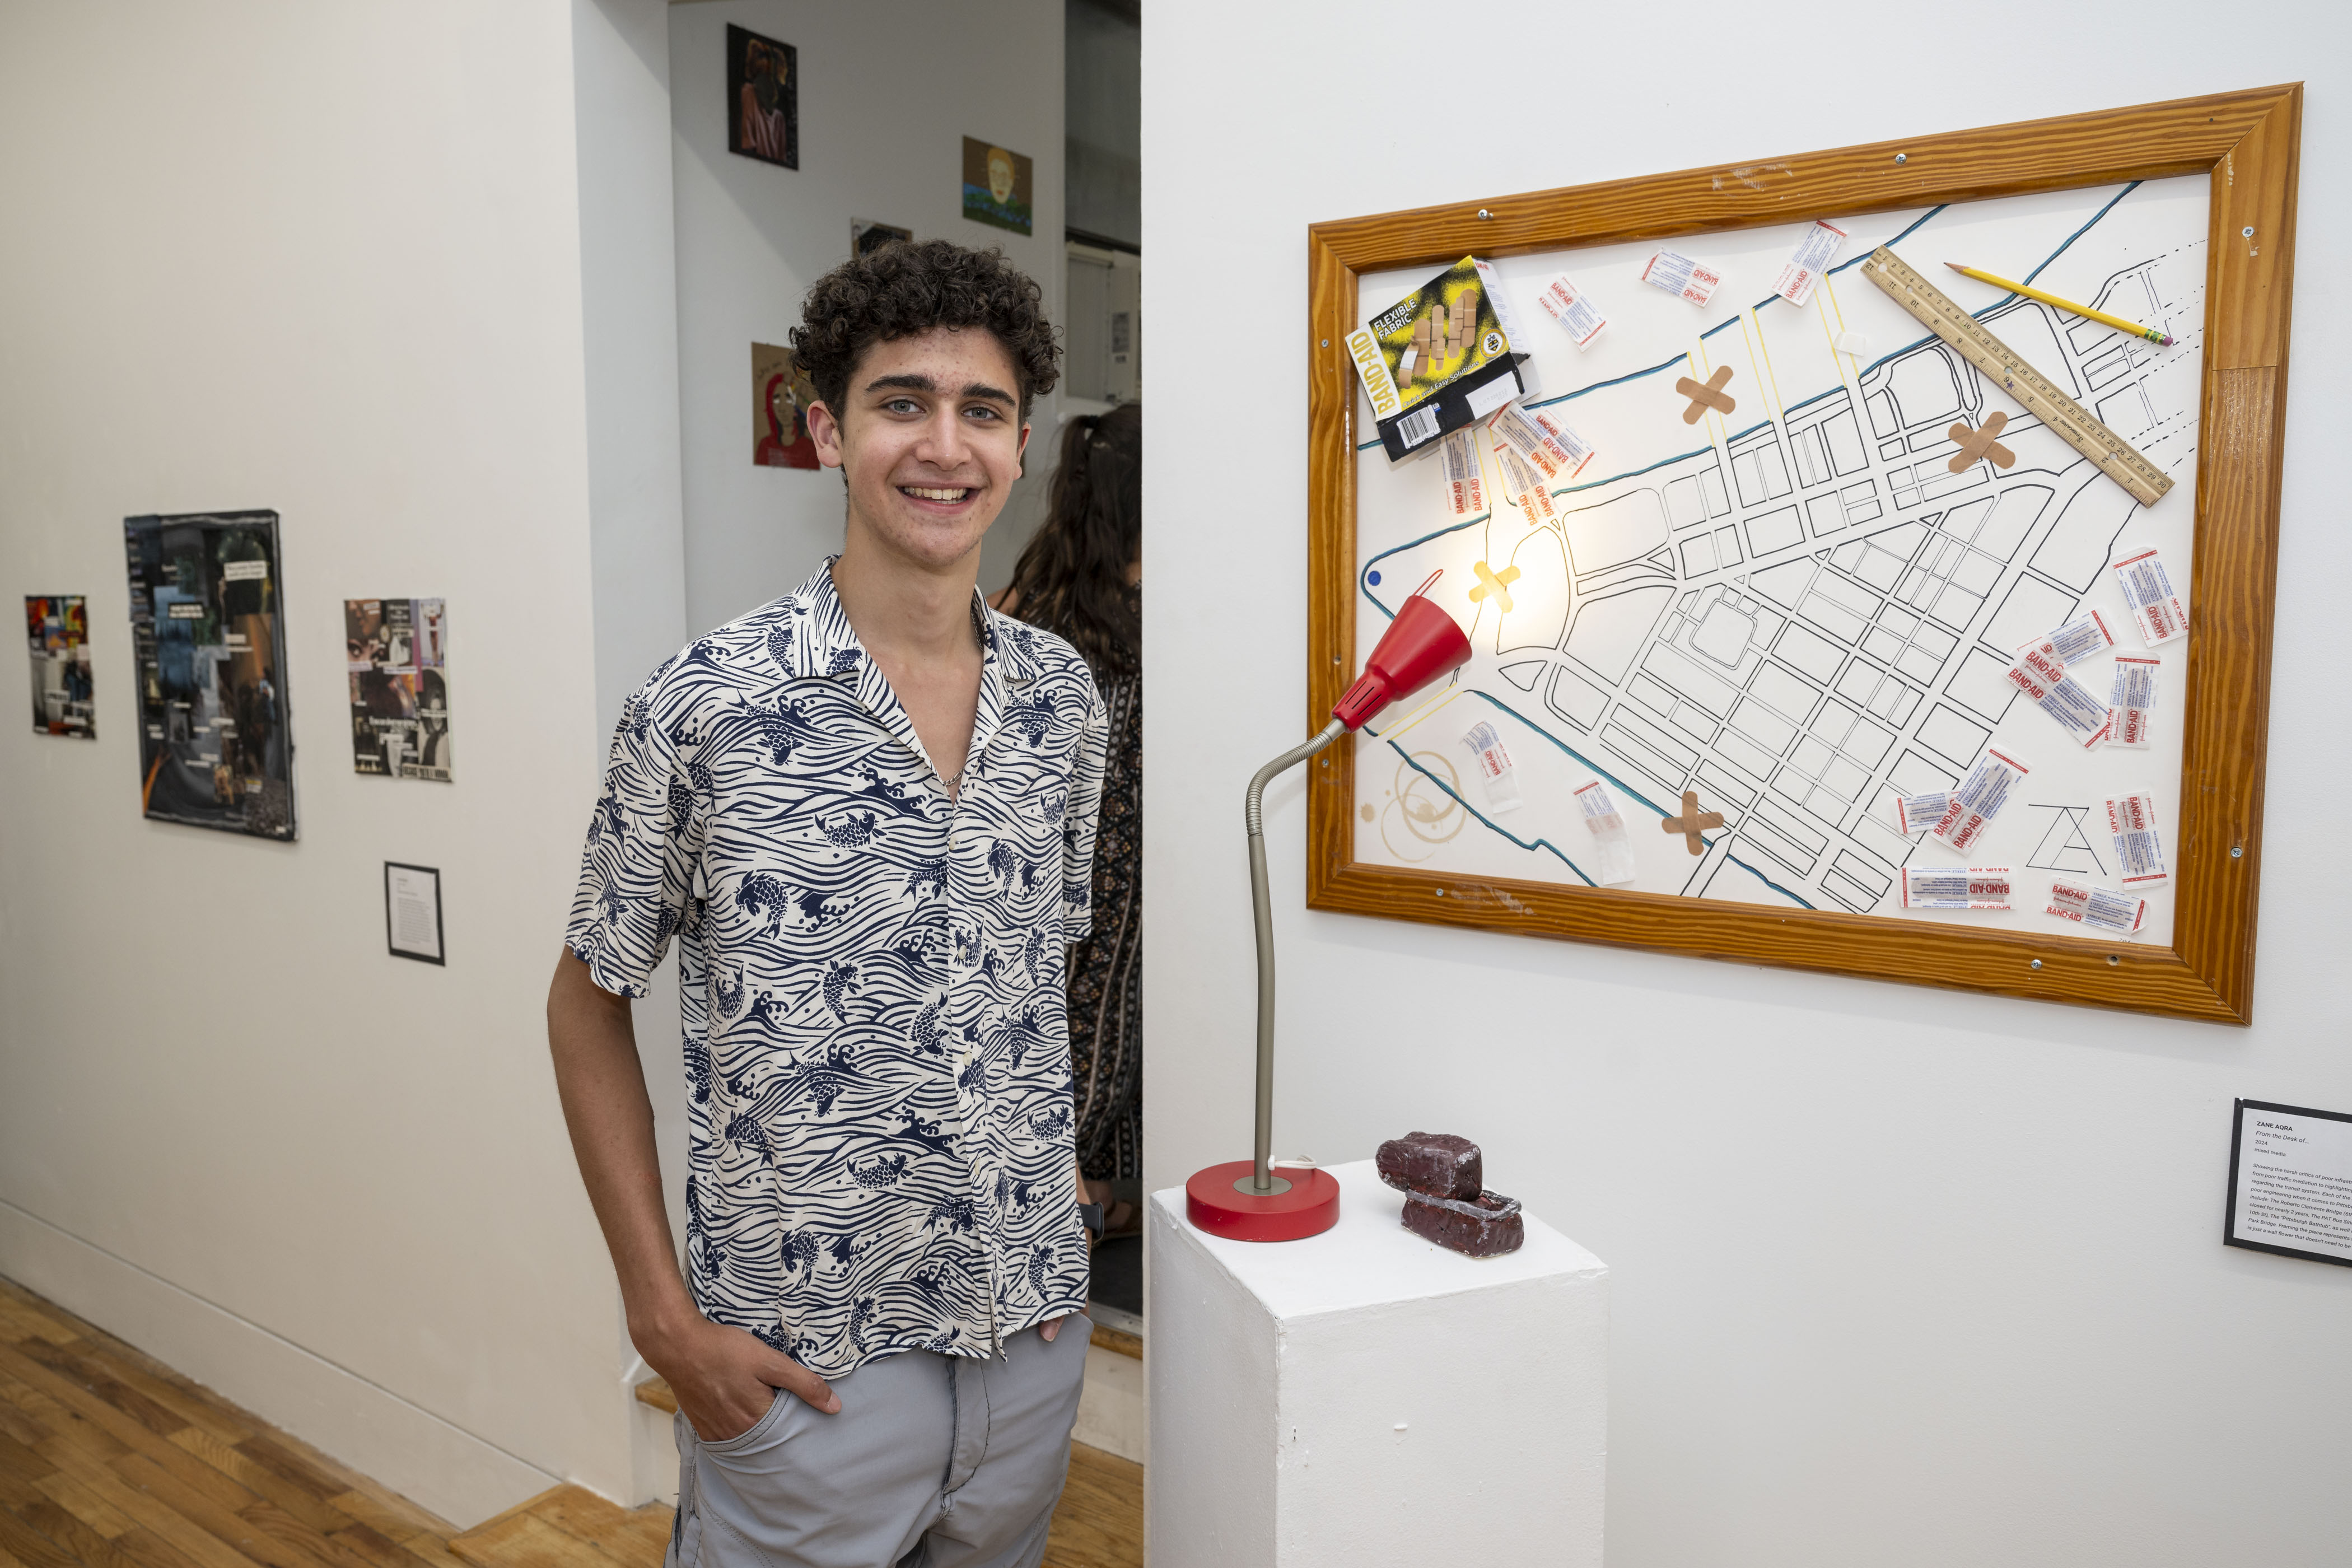 LEAP student, Zane, standing next to an installation he created by framing a large drawing behind a small clay sculpture and a found lamp